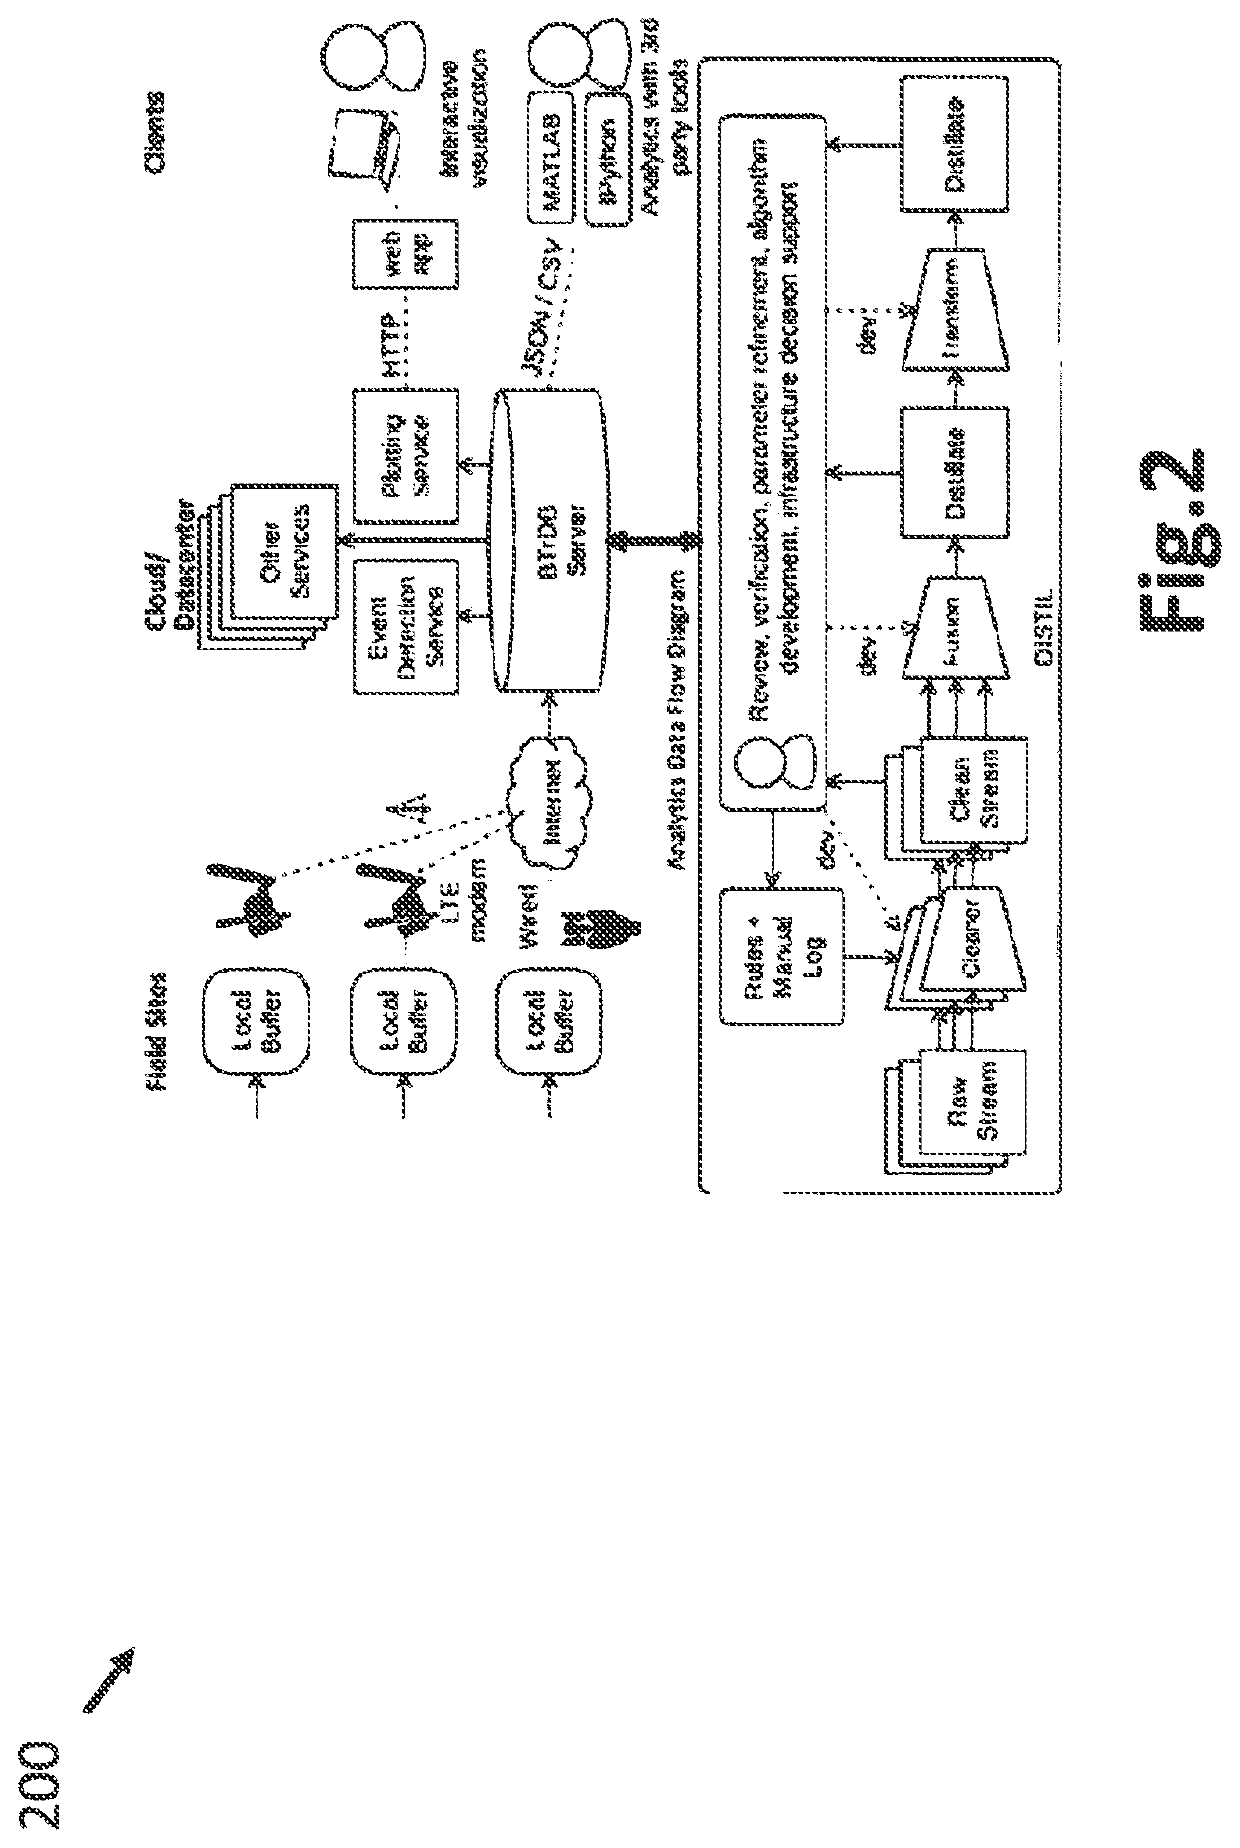 Methods and apparatus for the sensing, collecting, transmission, storage, and dissemination of high-resolution power grid electrical measurement data